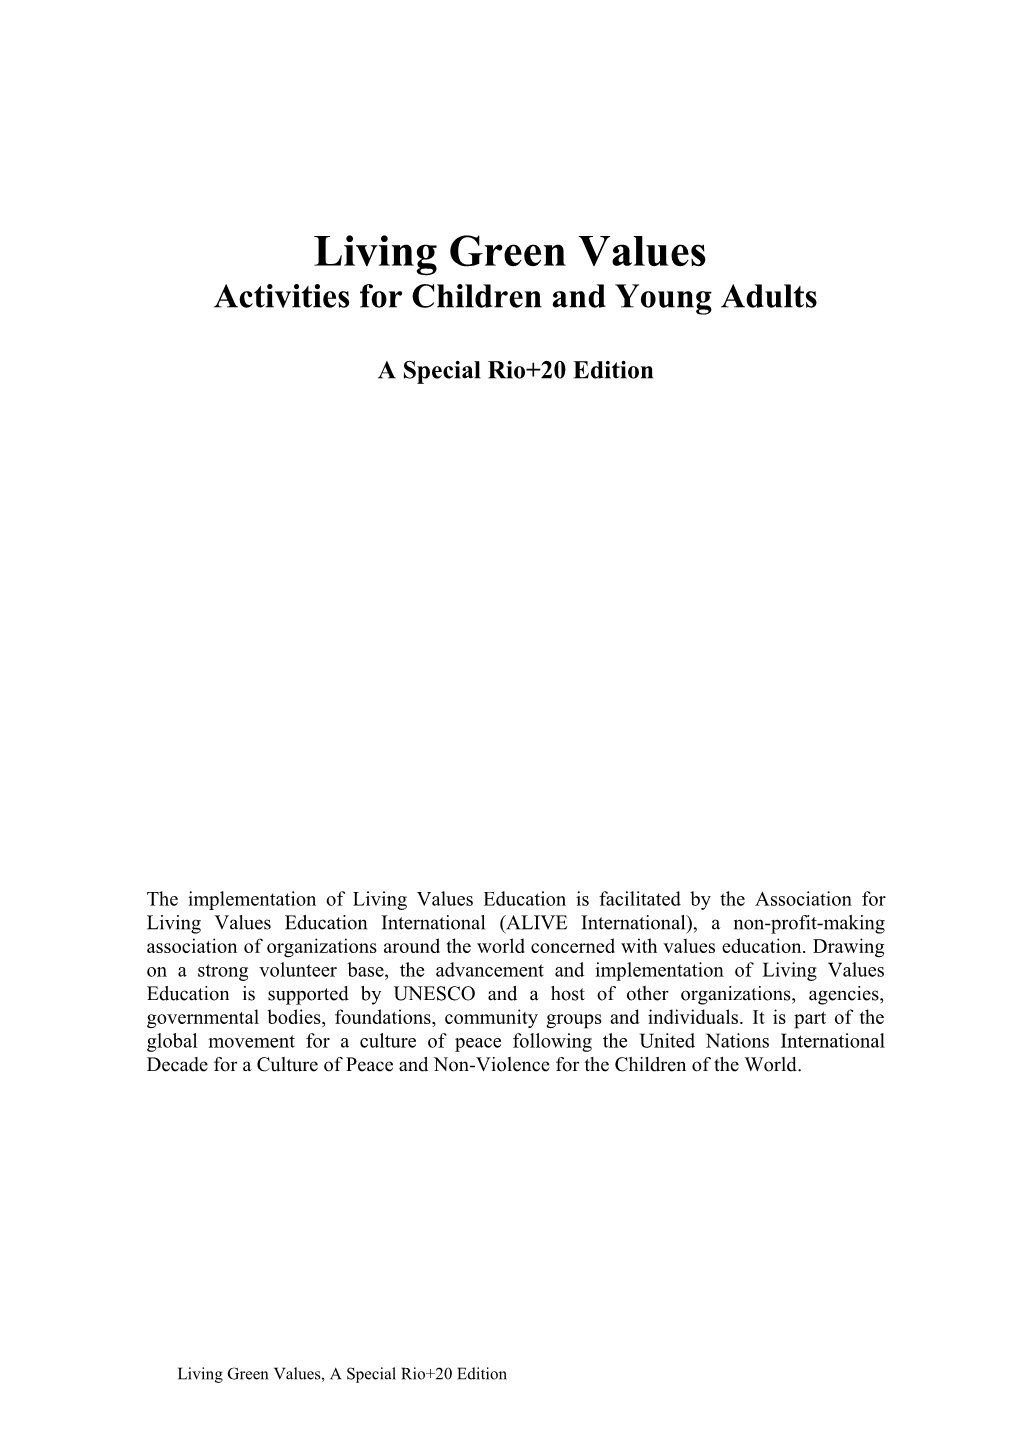 Living Green Values Activities for Children and Young Adults